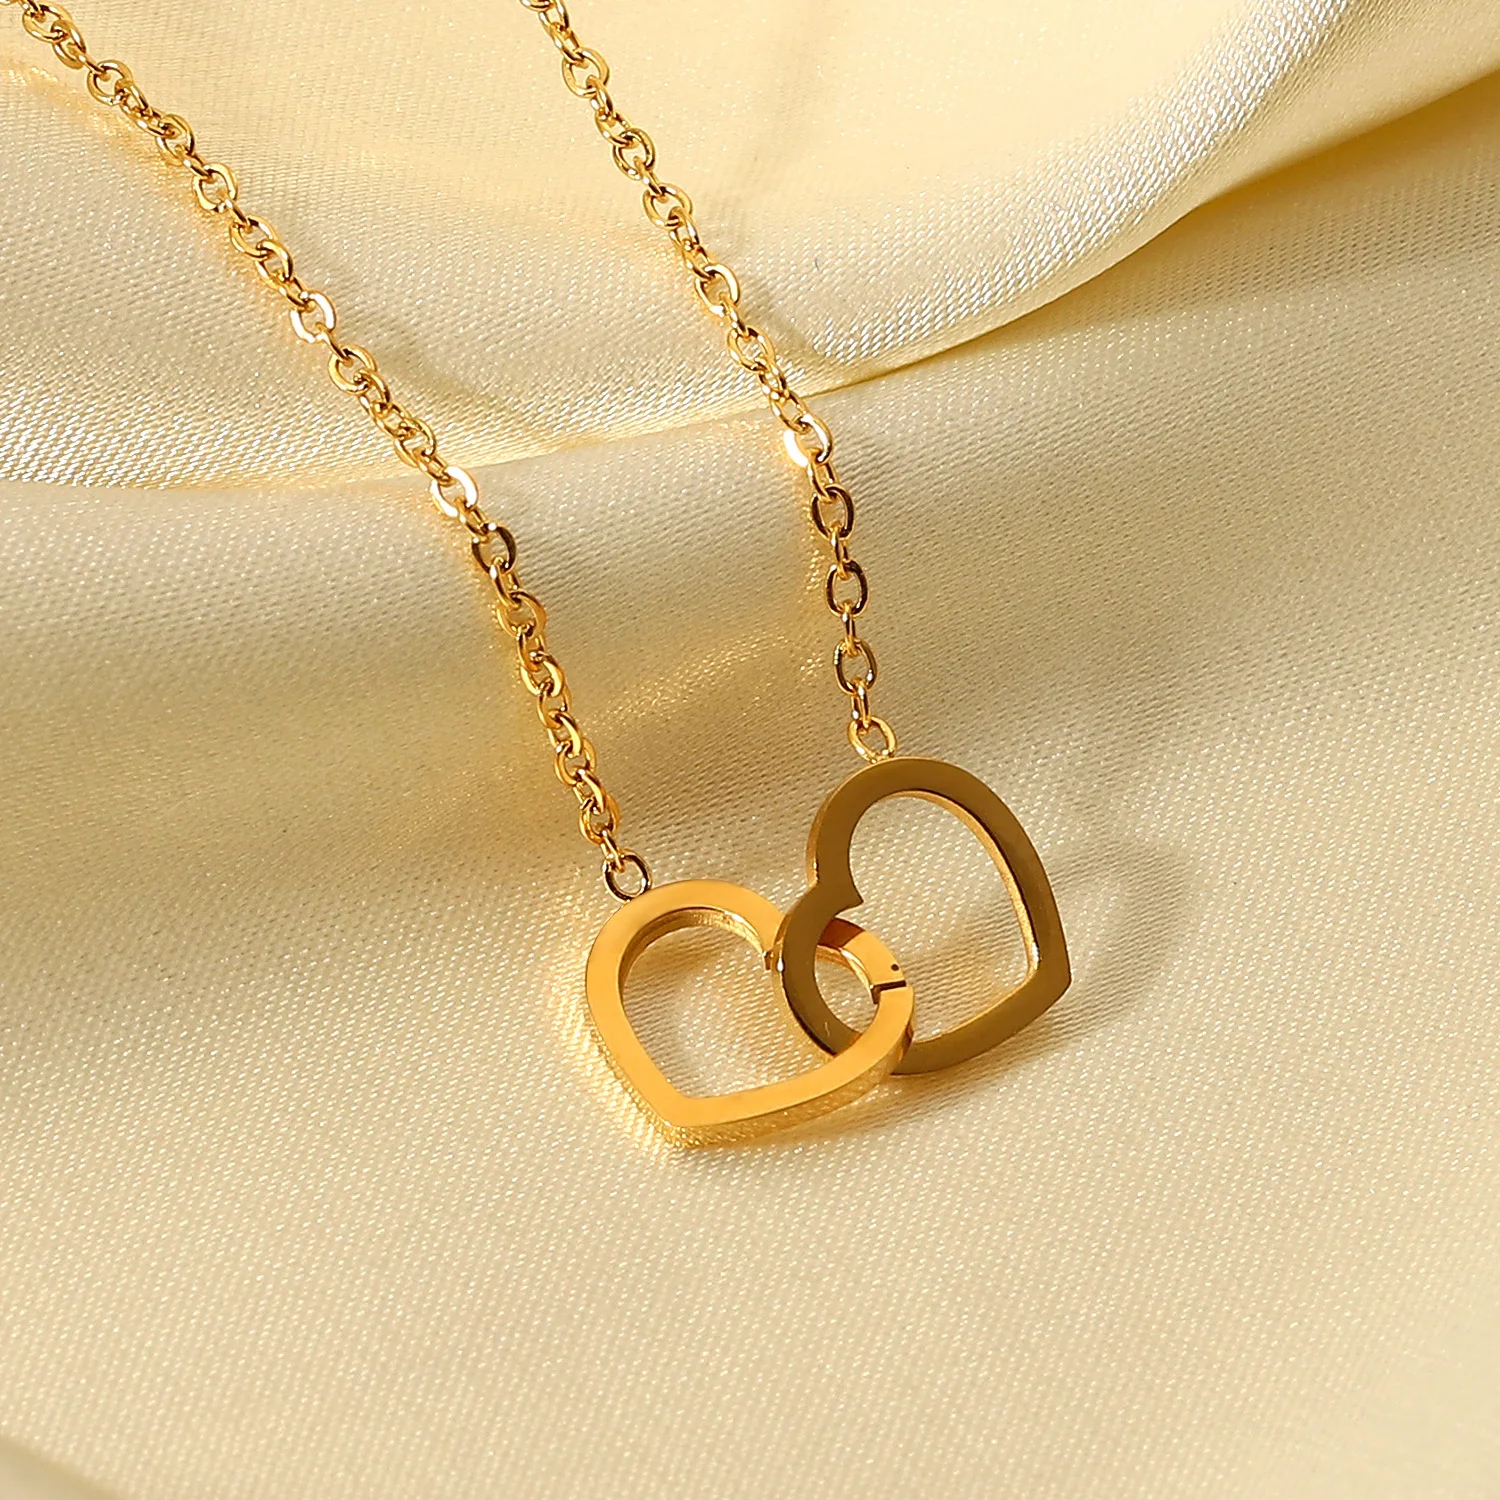 Romantic Gift Stainless Steel 18k Gold-plated Thin Chain Double Heart ...